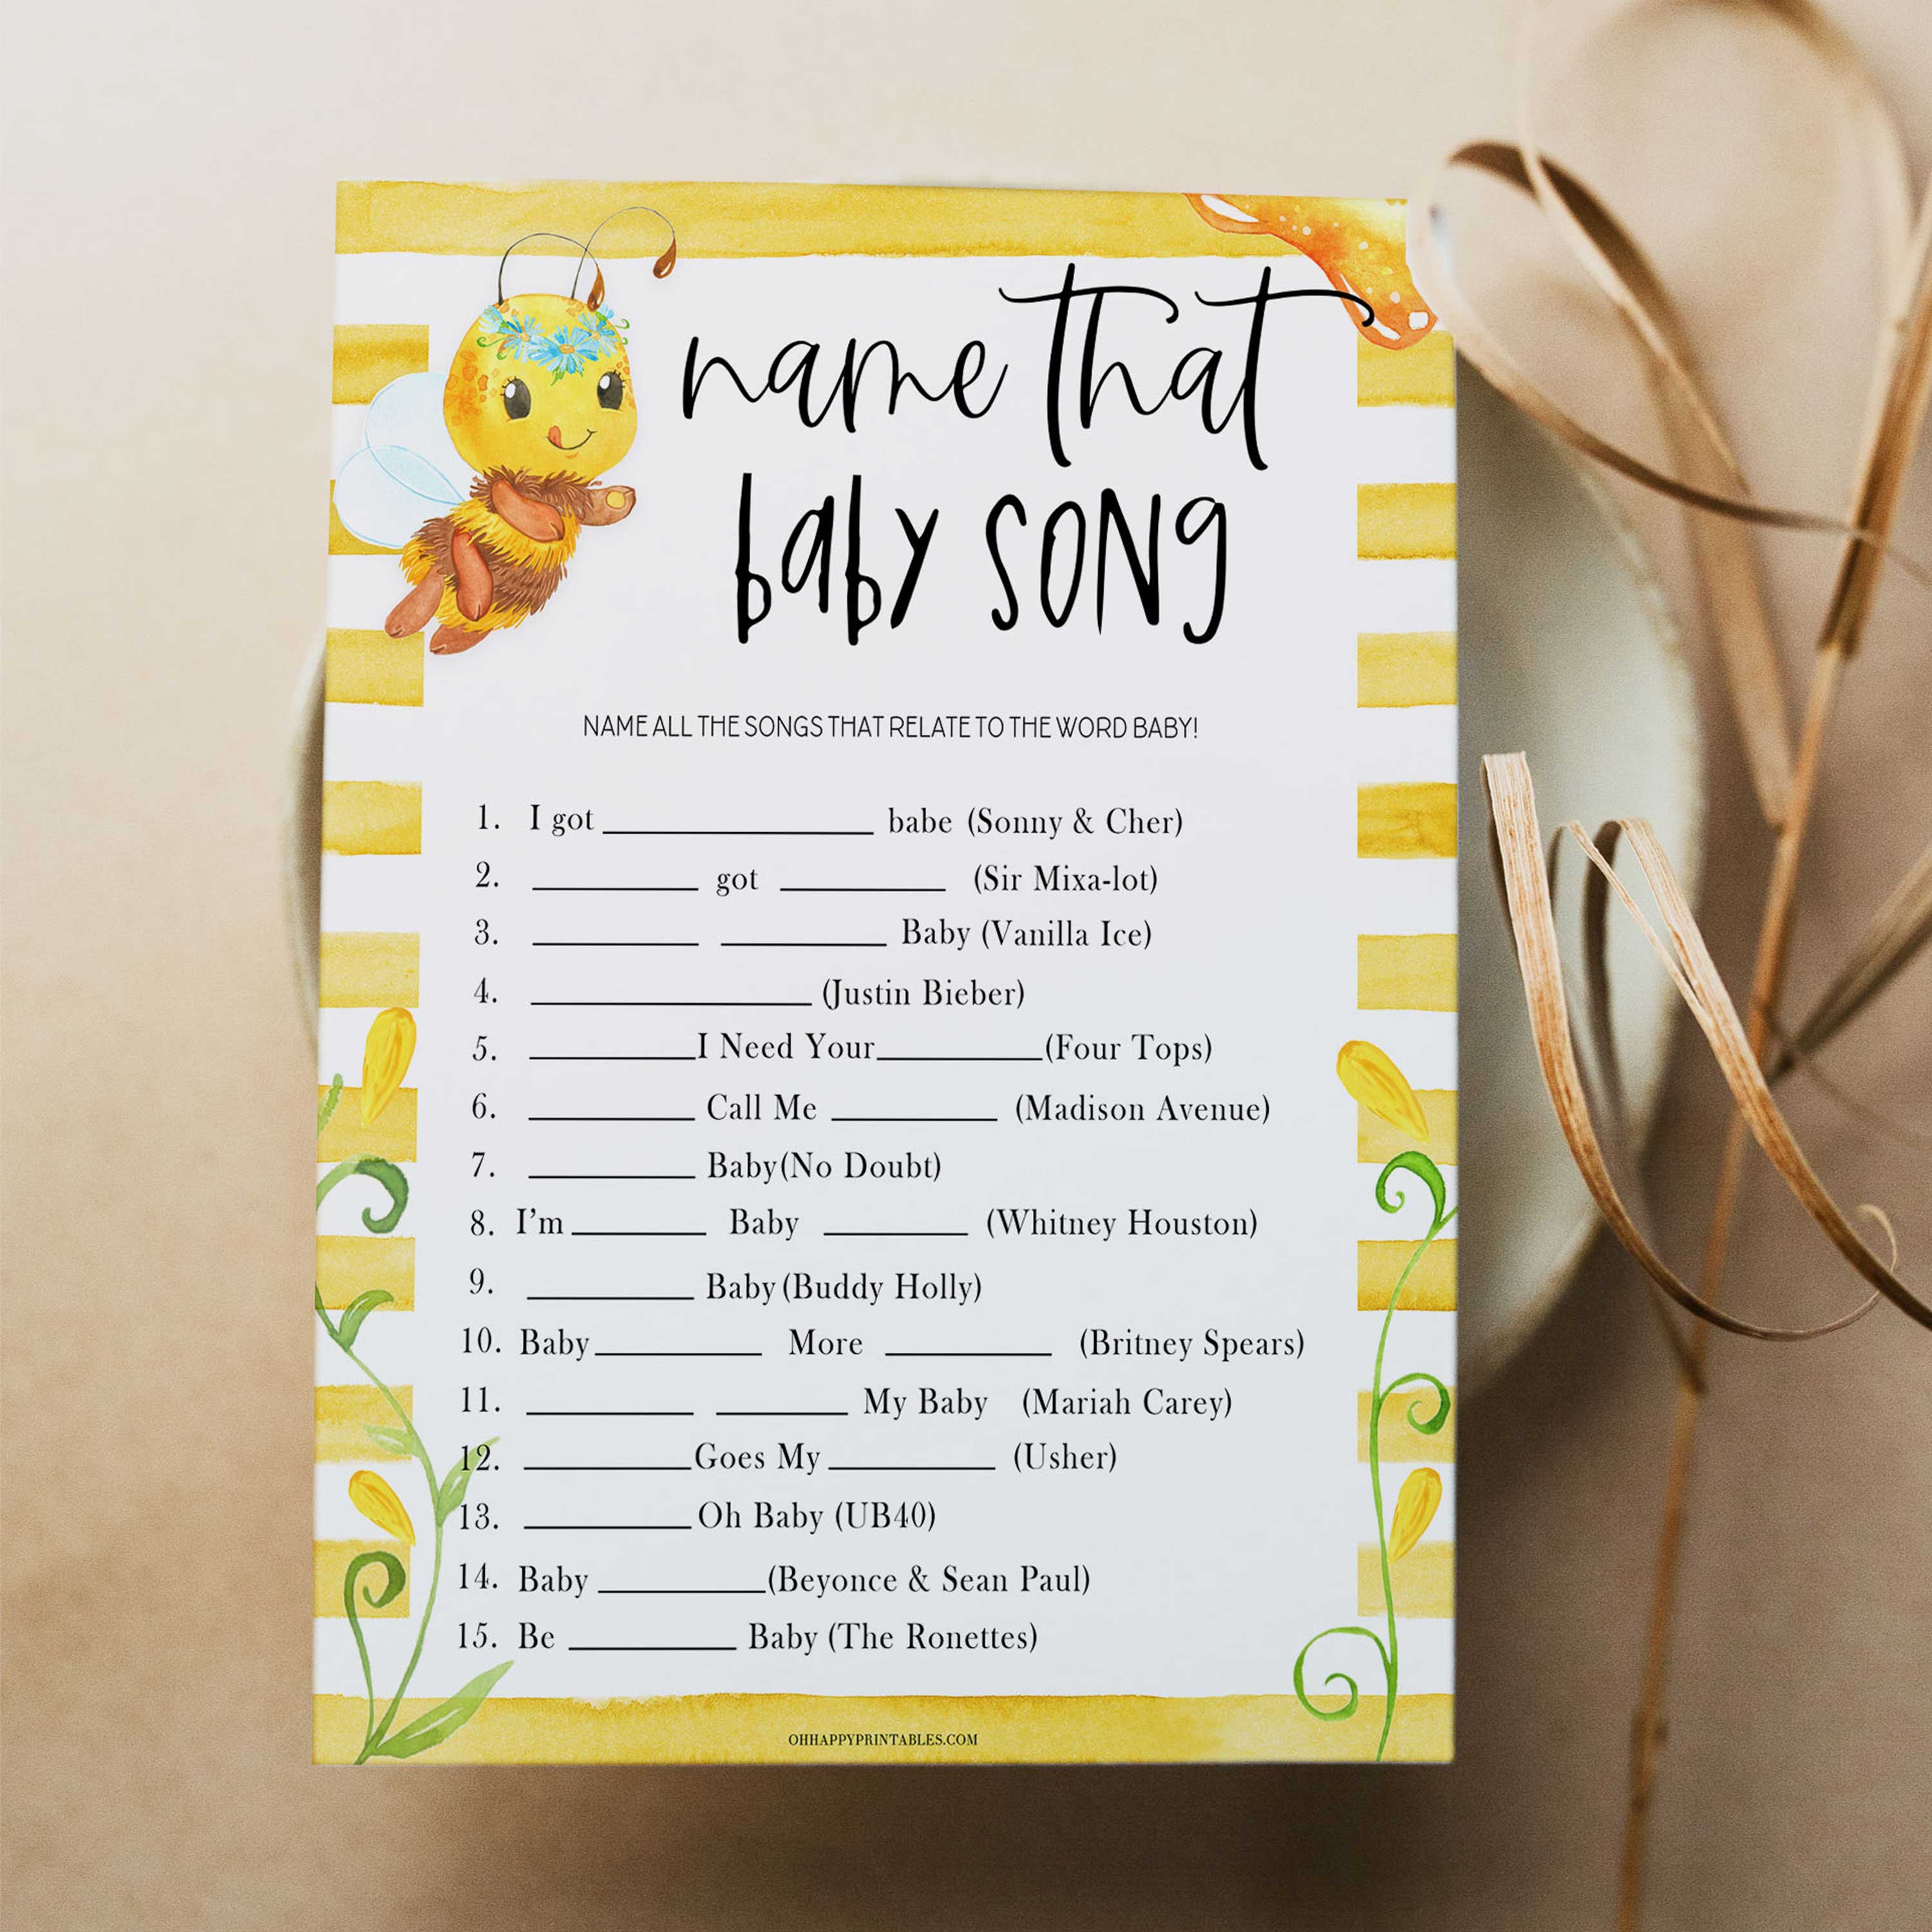 How Big Is Mommy's Belly - Downloadable Winnie The Pooh Baby